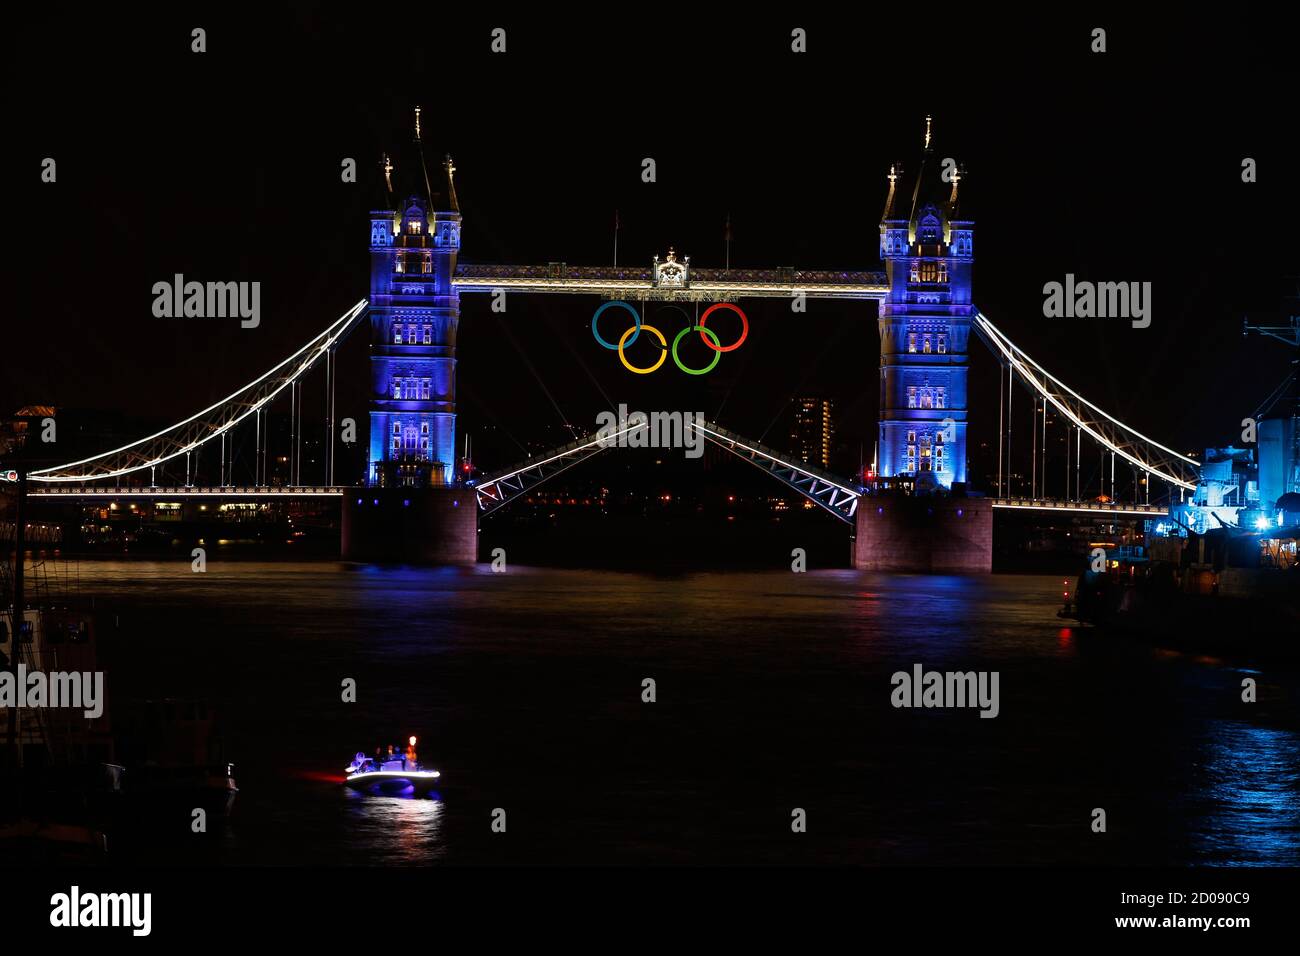 The Olympic rings hang on London's Tower Bridge as a speedboat driven by Britain's David Beckham and carrying the Olympic torch prepares to drive under the bridge to mark the opening ceremony of the London 2012 Olympic Games July 27, 2012. REUTERS/Paul Hanna  (BRITAIN - Tags: SPORT OLYMPICS CITYSPACE) BEST QUALITY AVAILABLE Stock Photo